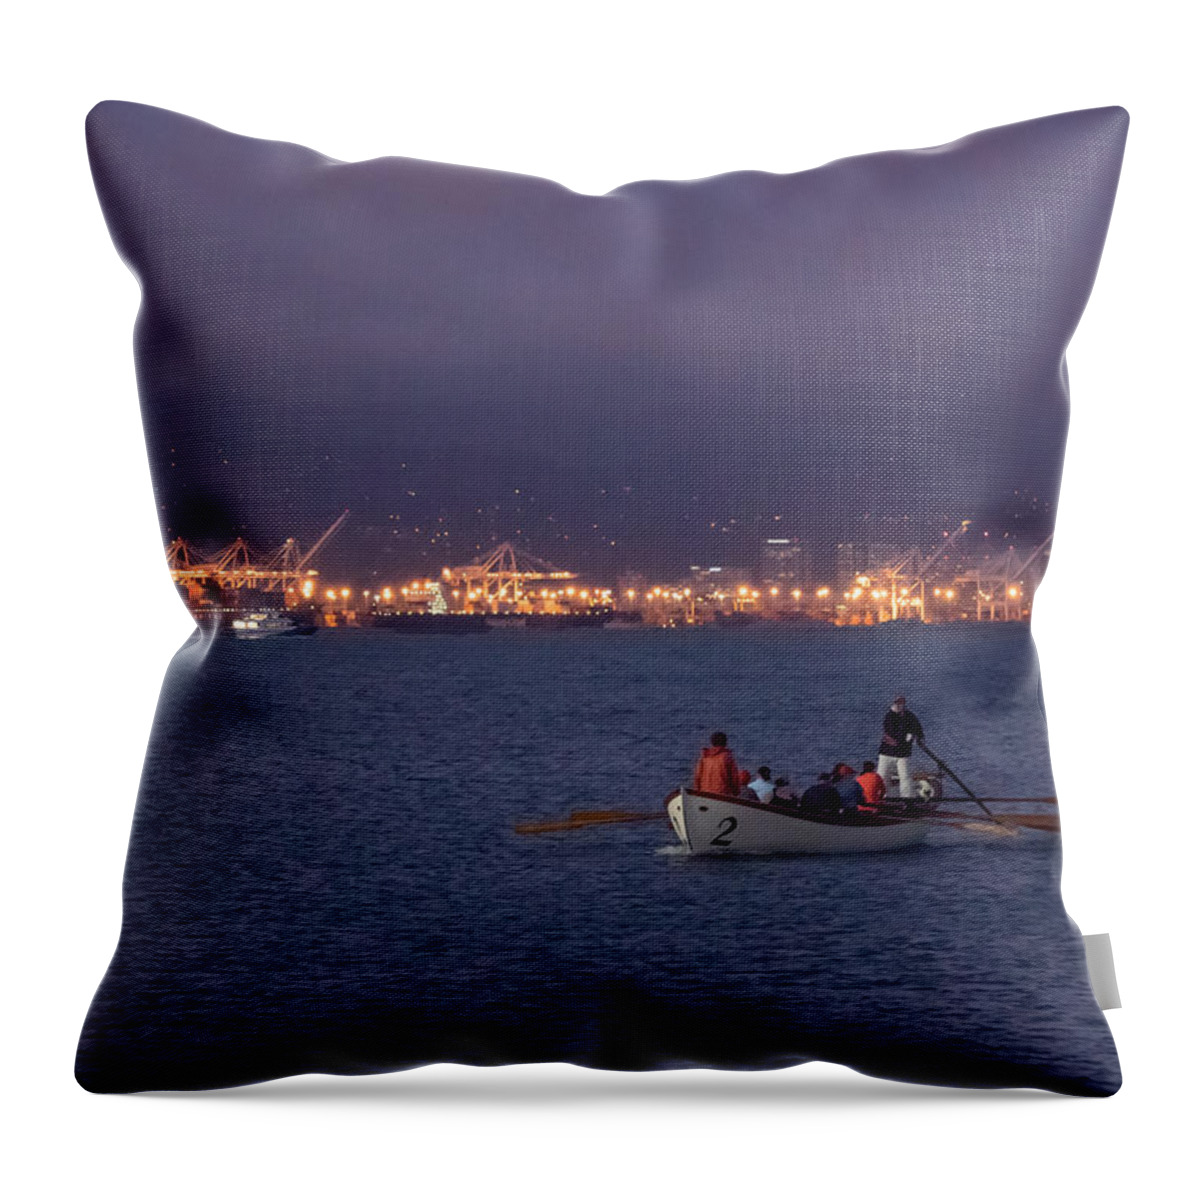 Boating Throw Pillow featuring the photograph Night Boating on San Francisco Bay by Derek Dean